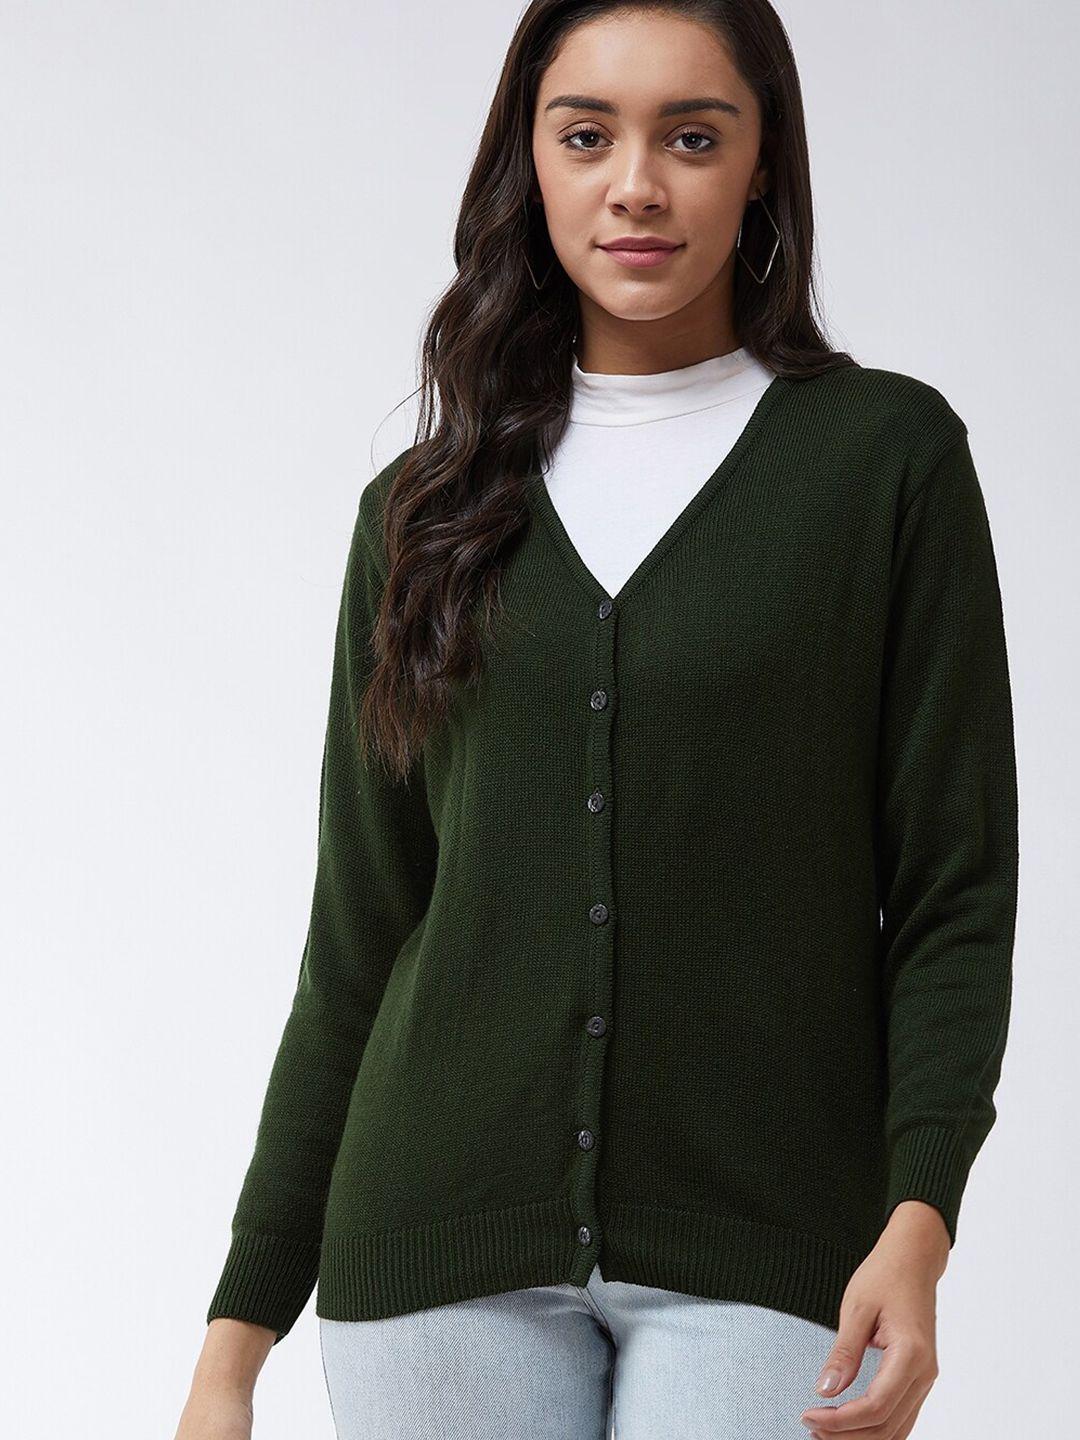 modeve-women-olive-green-solid-cardigan